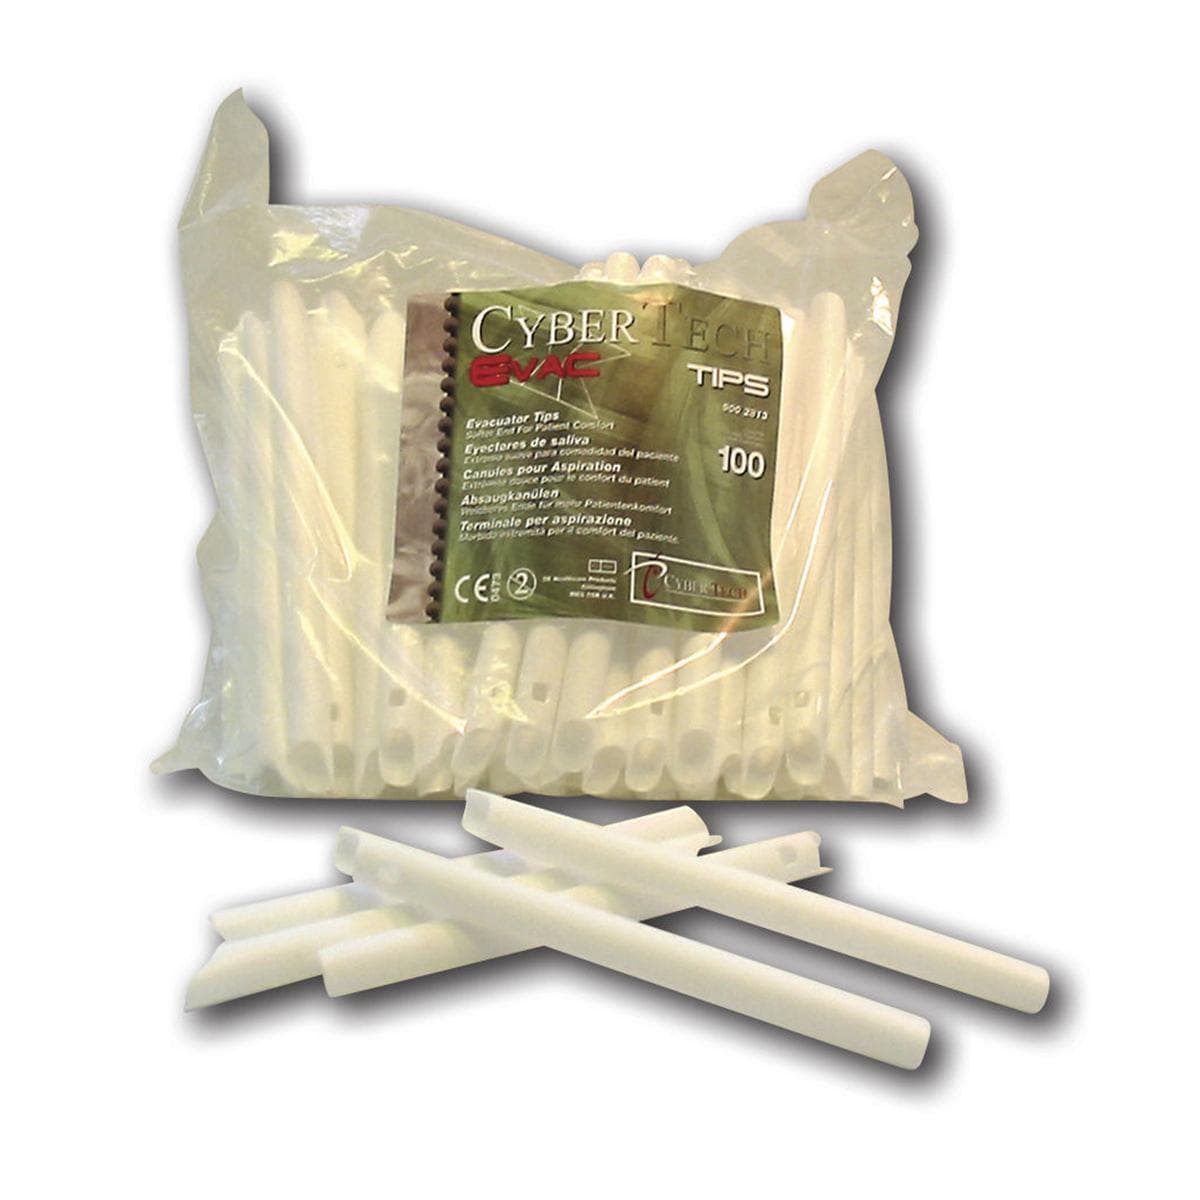 CyberEvac Canules d'aspiration disposable - Emballage, 100 pcs